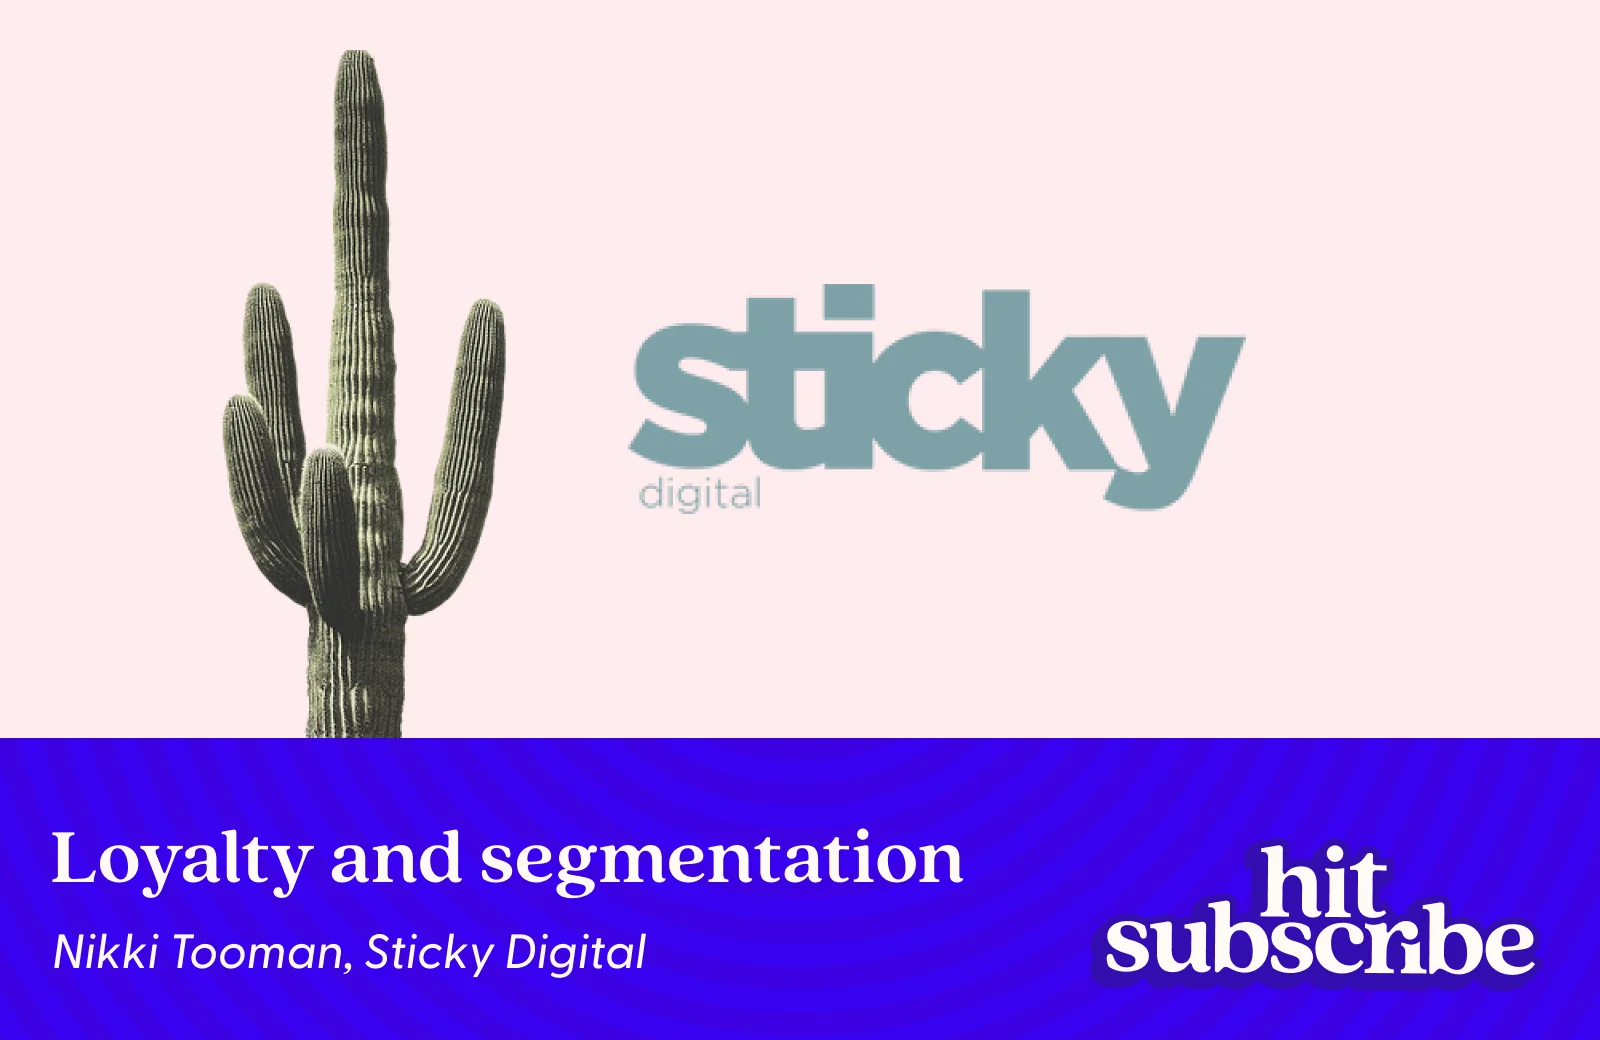 Hit Subscribe podcast episode cover featuring Nikki Tooman, Cofounder & CEO, Sticky Digital